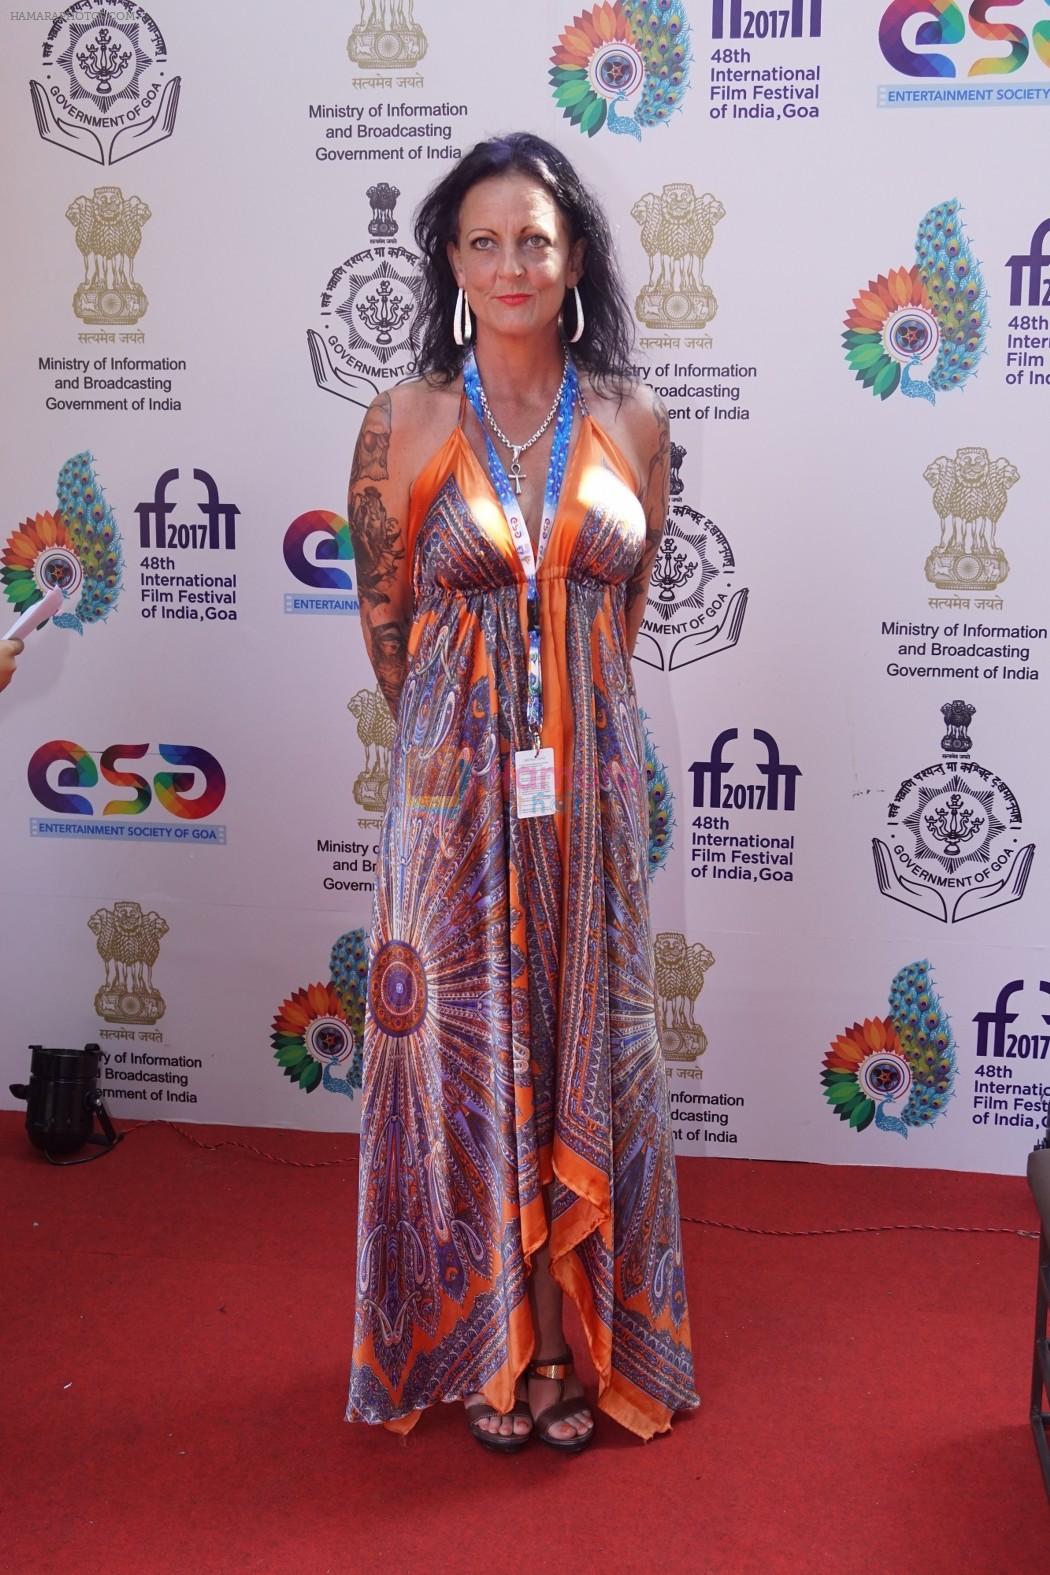 PC & Red Carpet Delegates Of Canada at IFFI 2017 on 21st Nov 2017